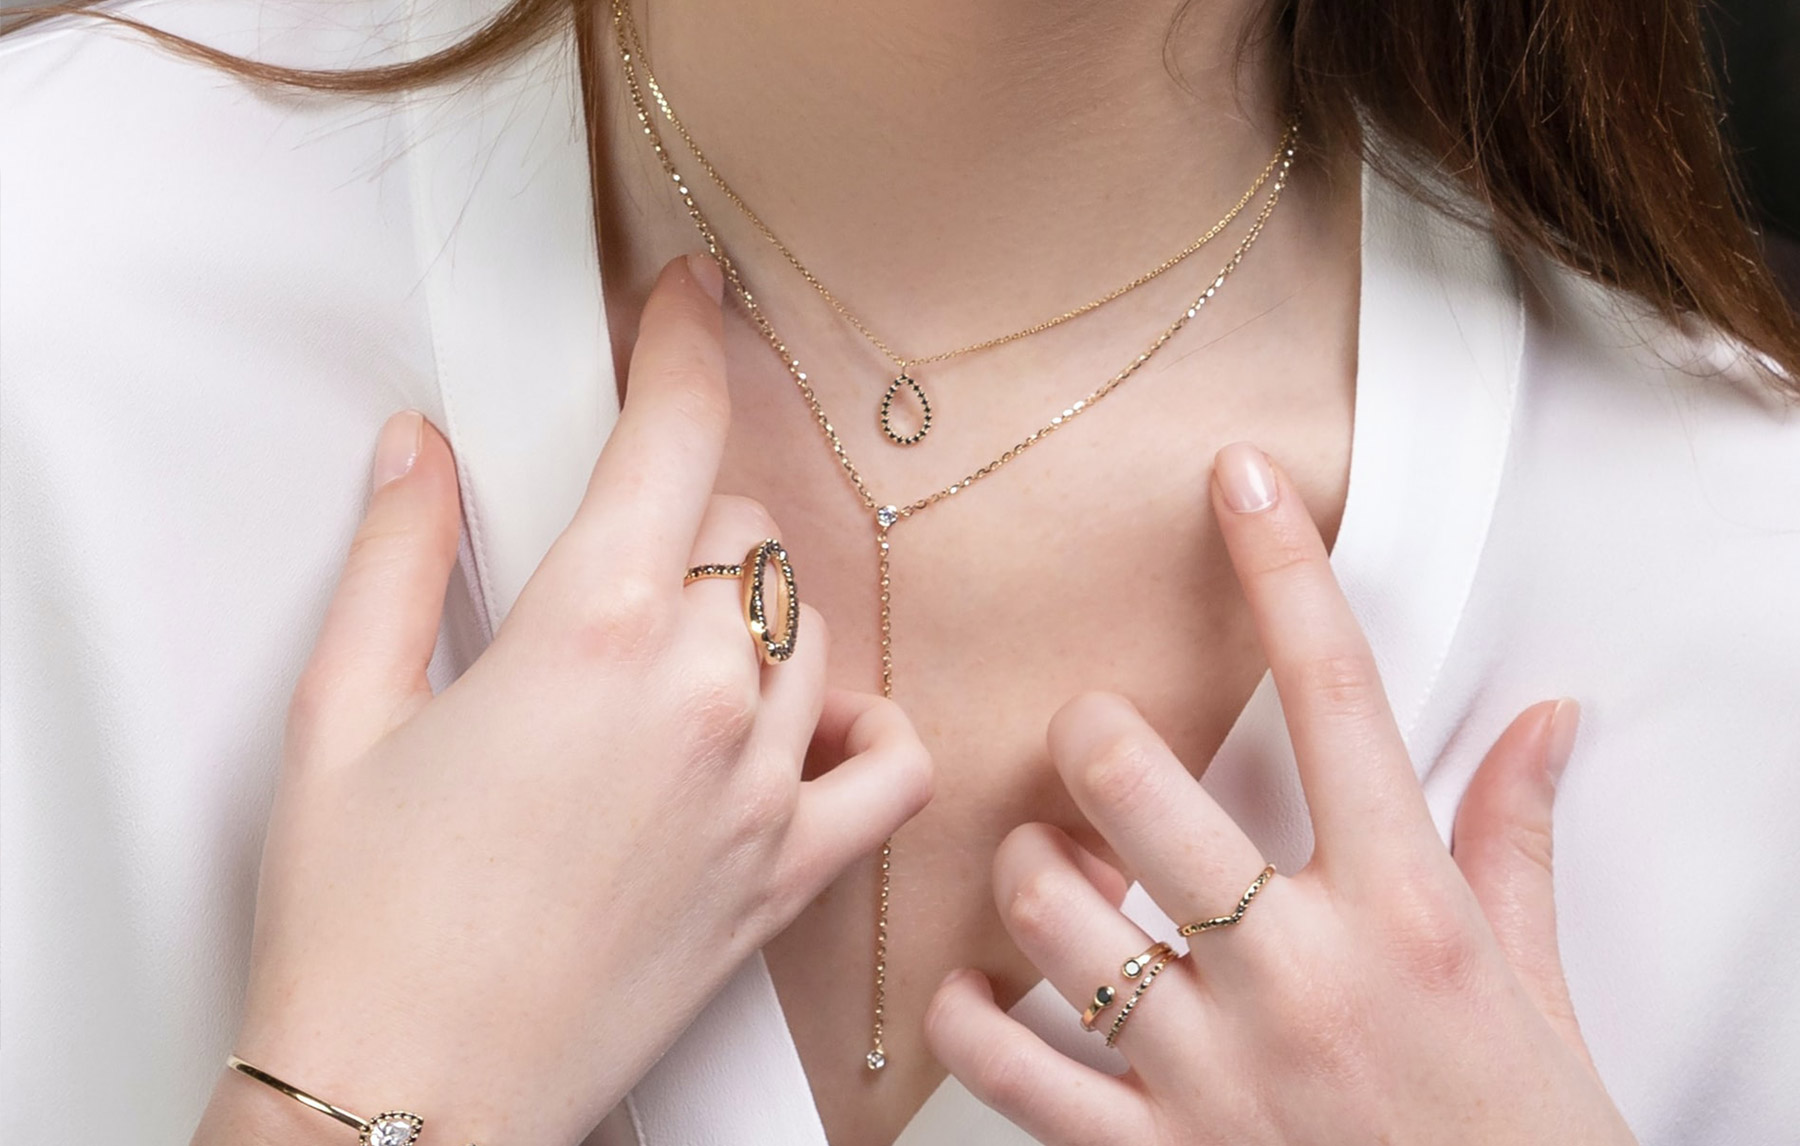 Woman's Neck & Hands. She's Wearing a White Blouse and Gold Necklaces and Rings